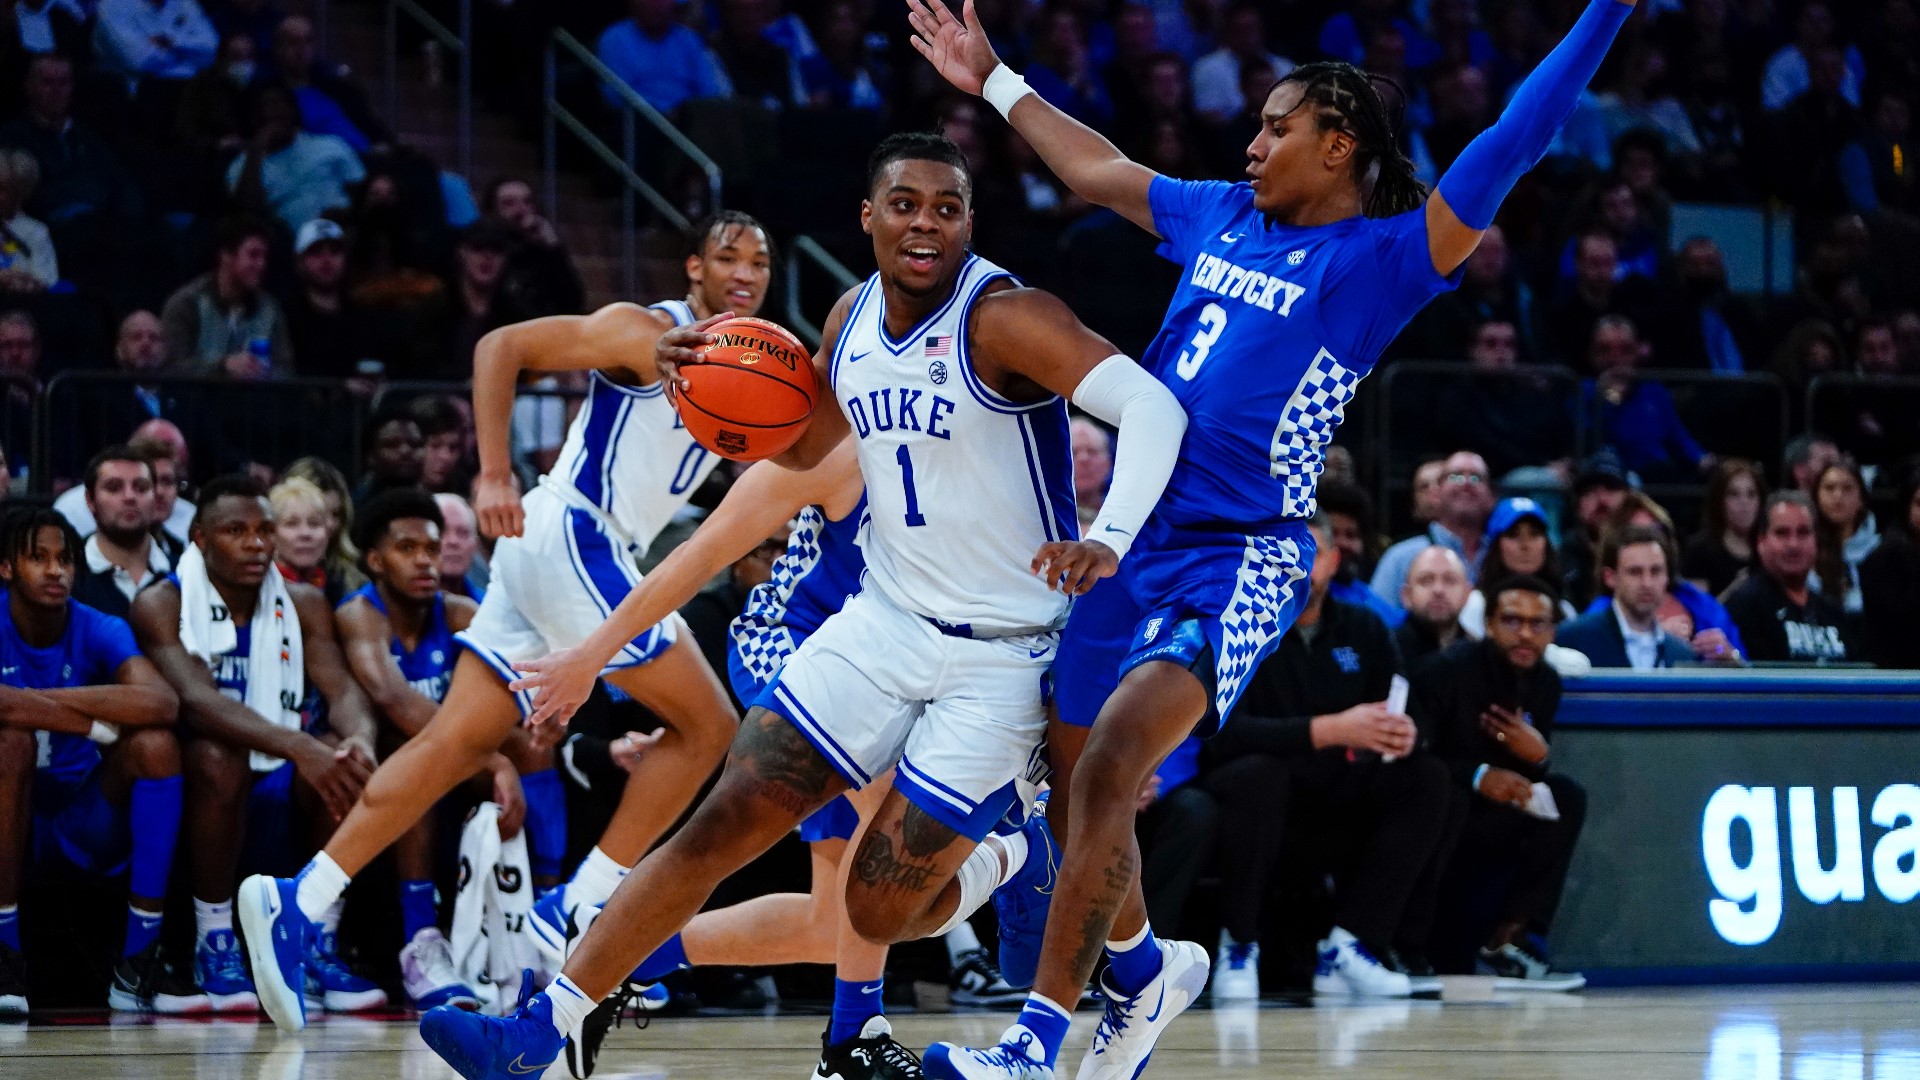 Kentucky's next game will be on Nov. 12 against Robert Morris University at Rupp Arena.